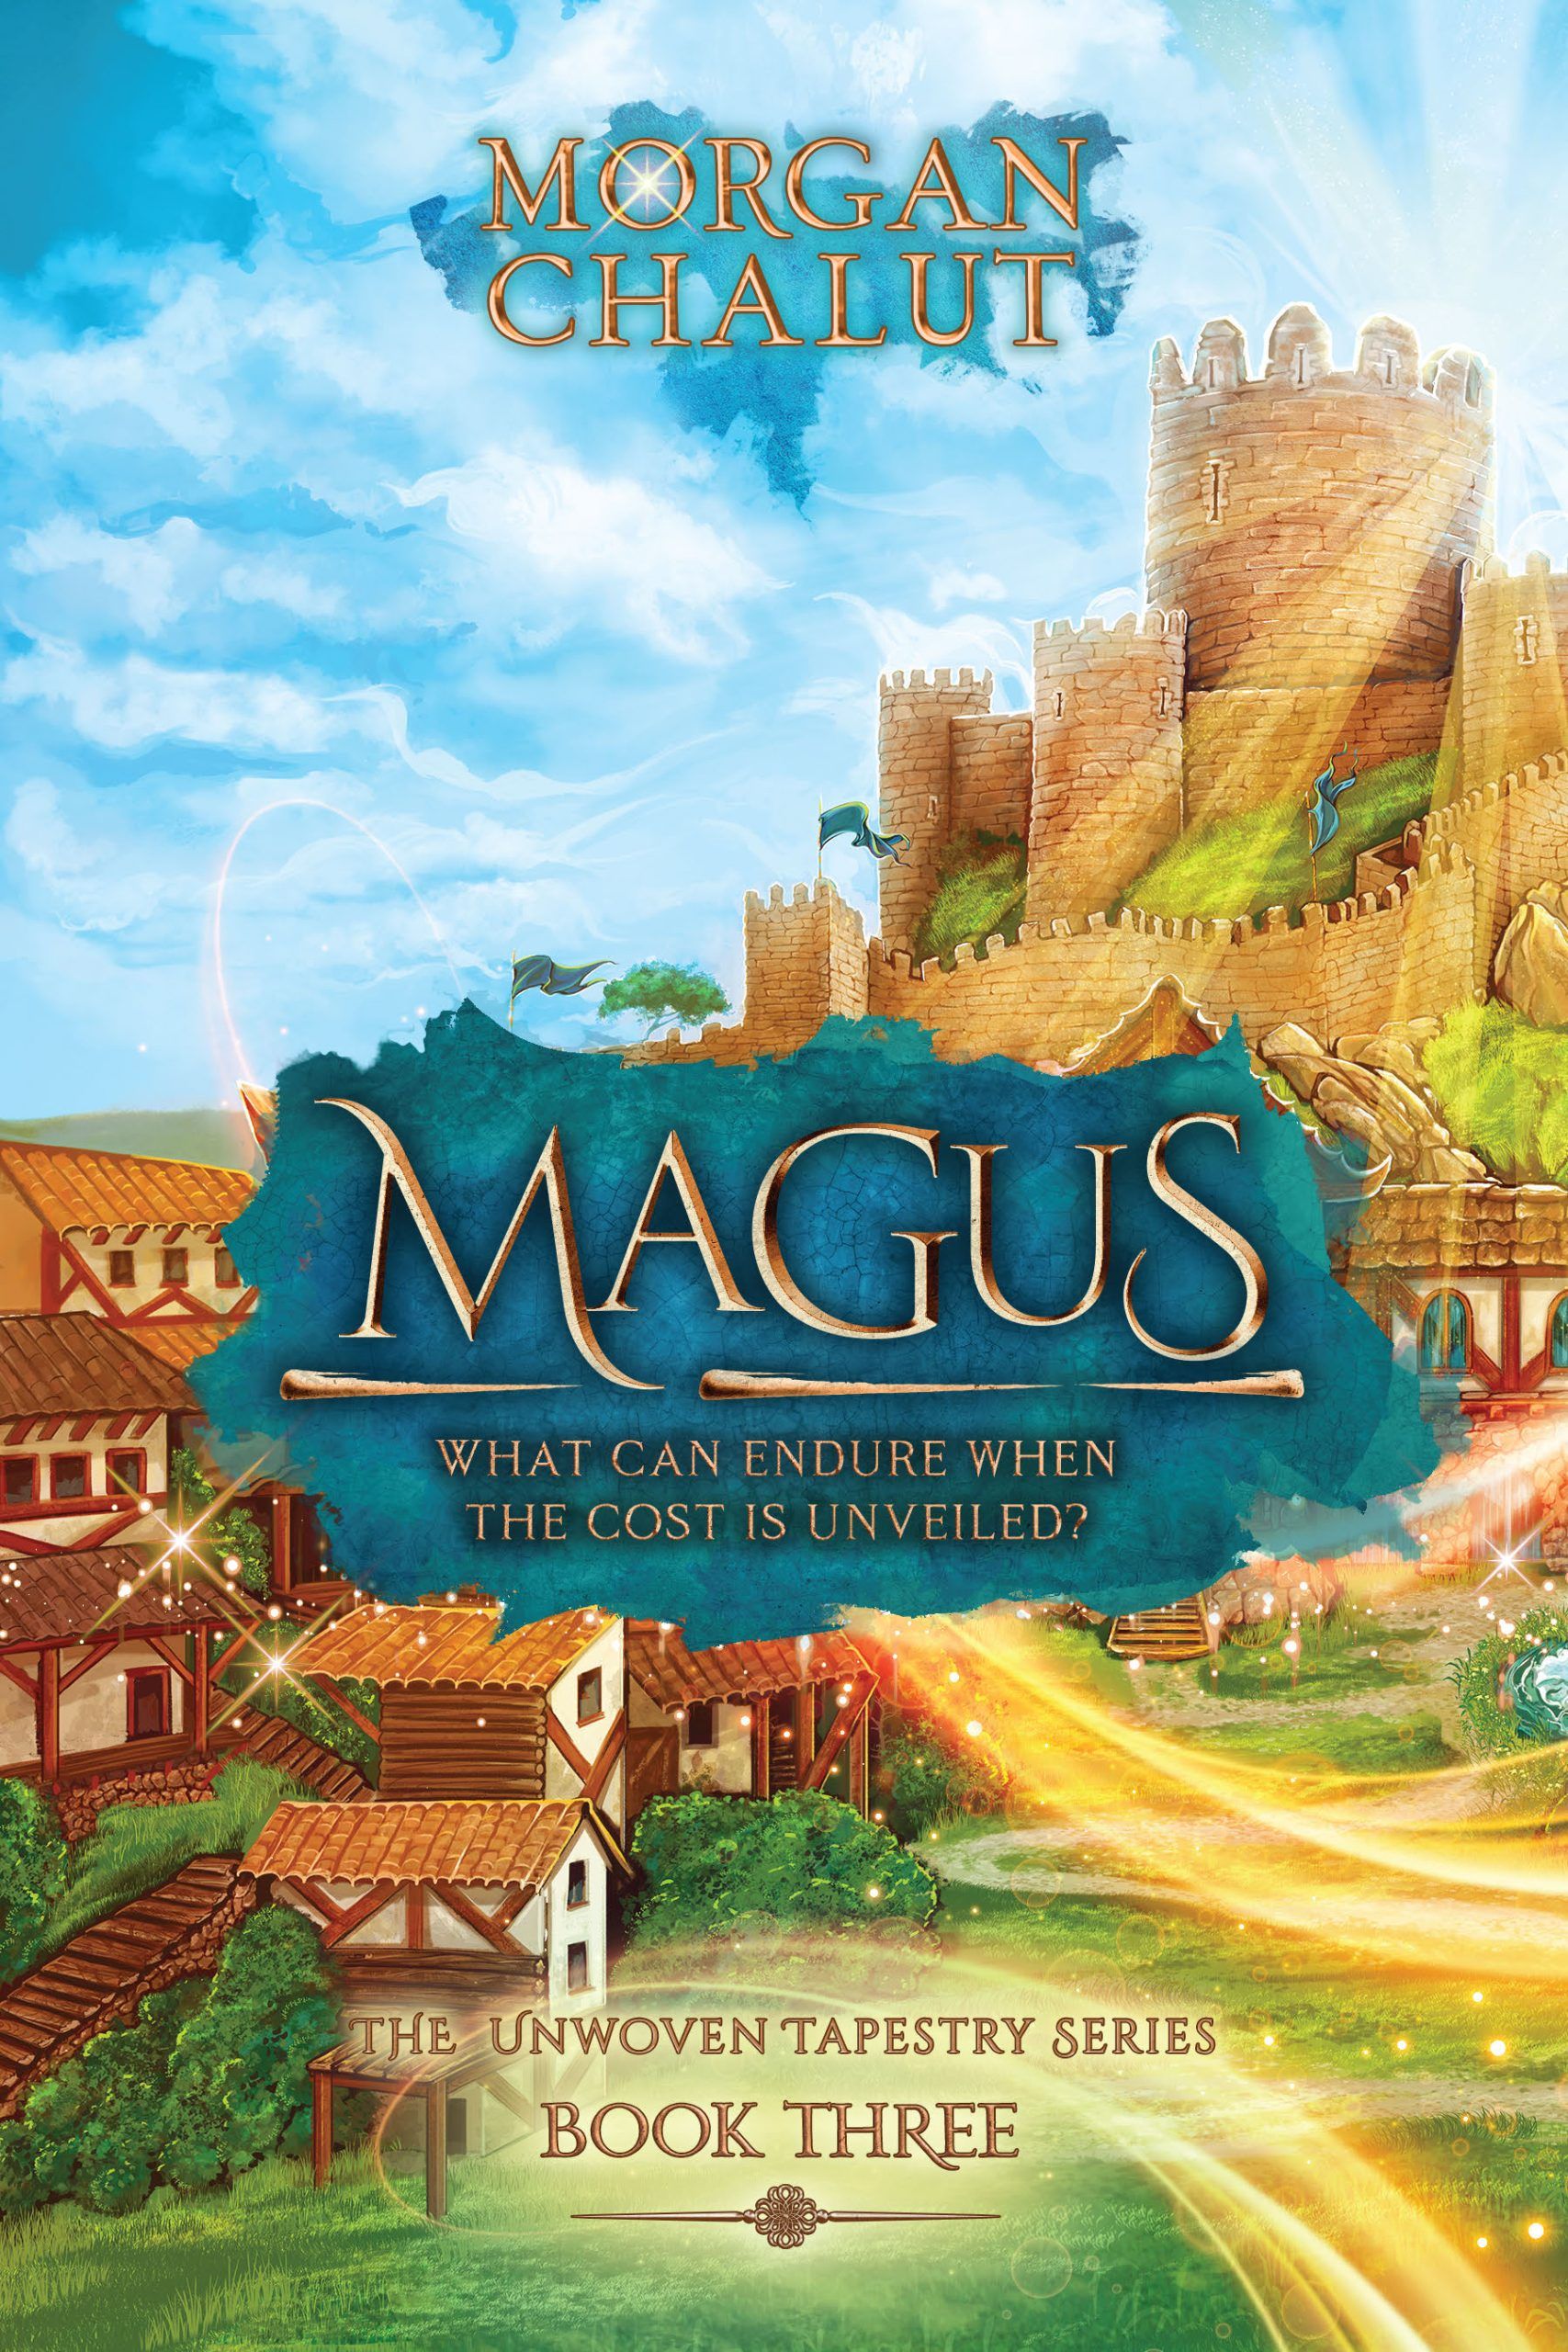 Book cover: "Magus". Illustration of a fantasy village below a castle.